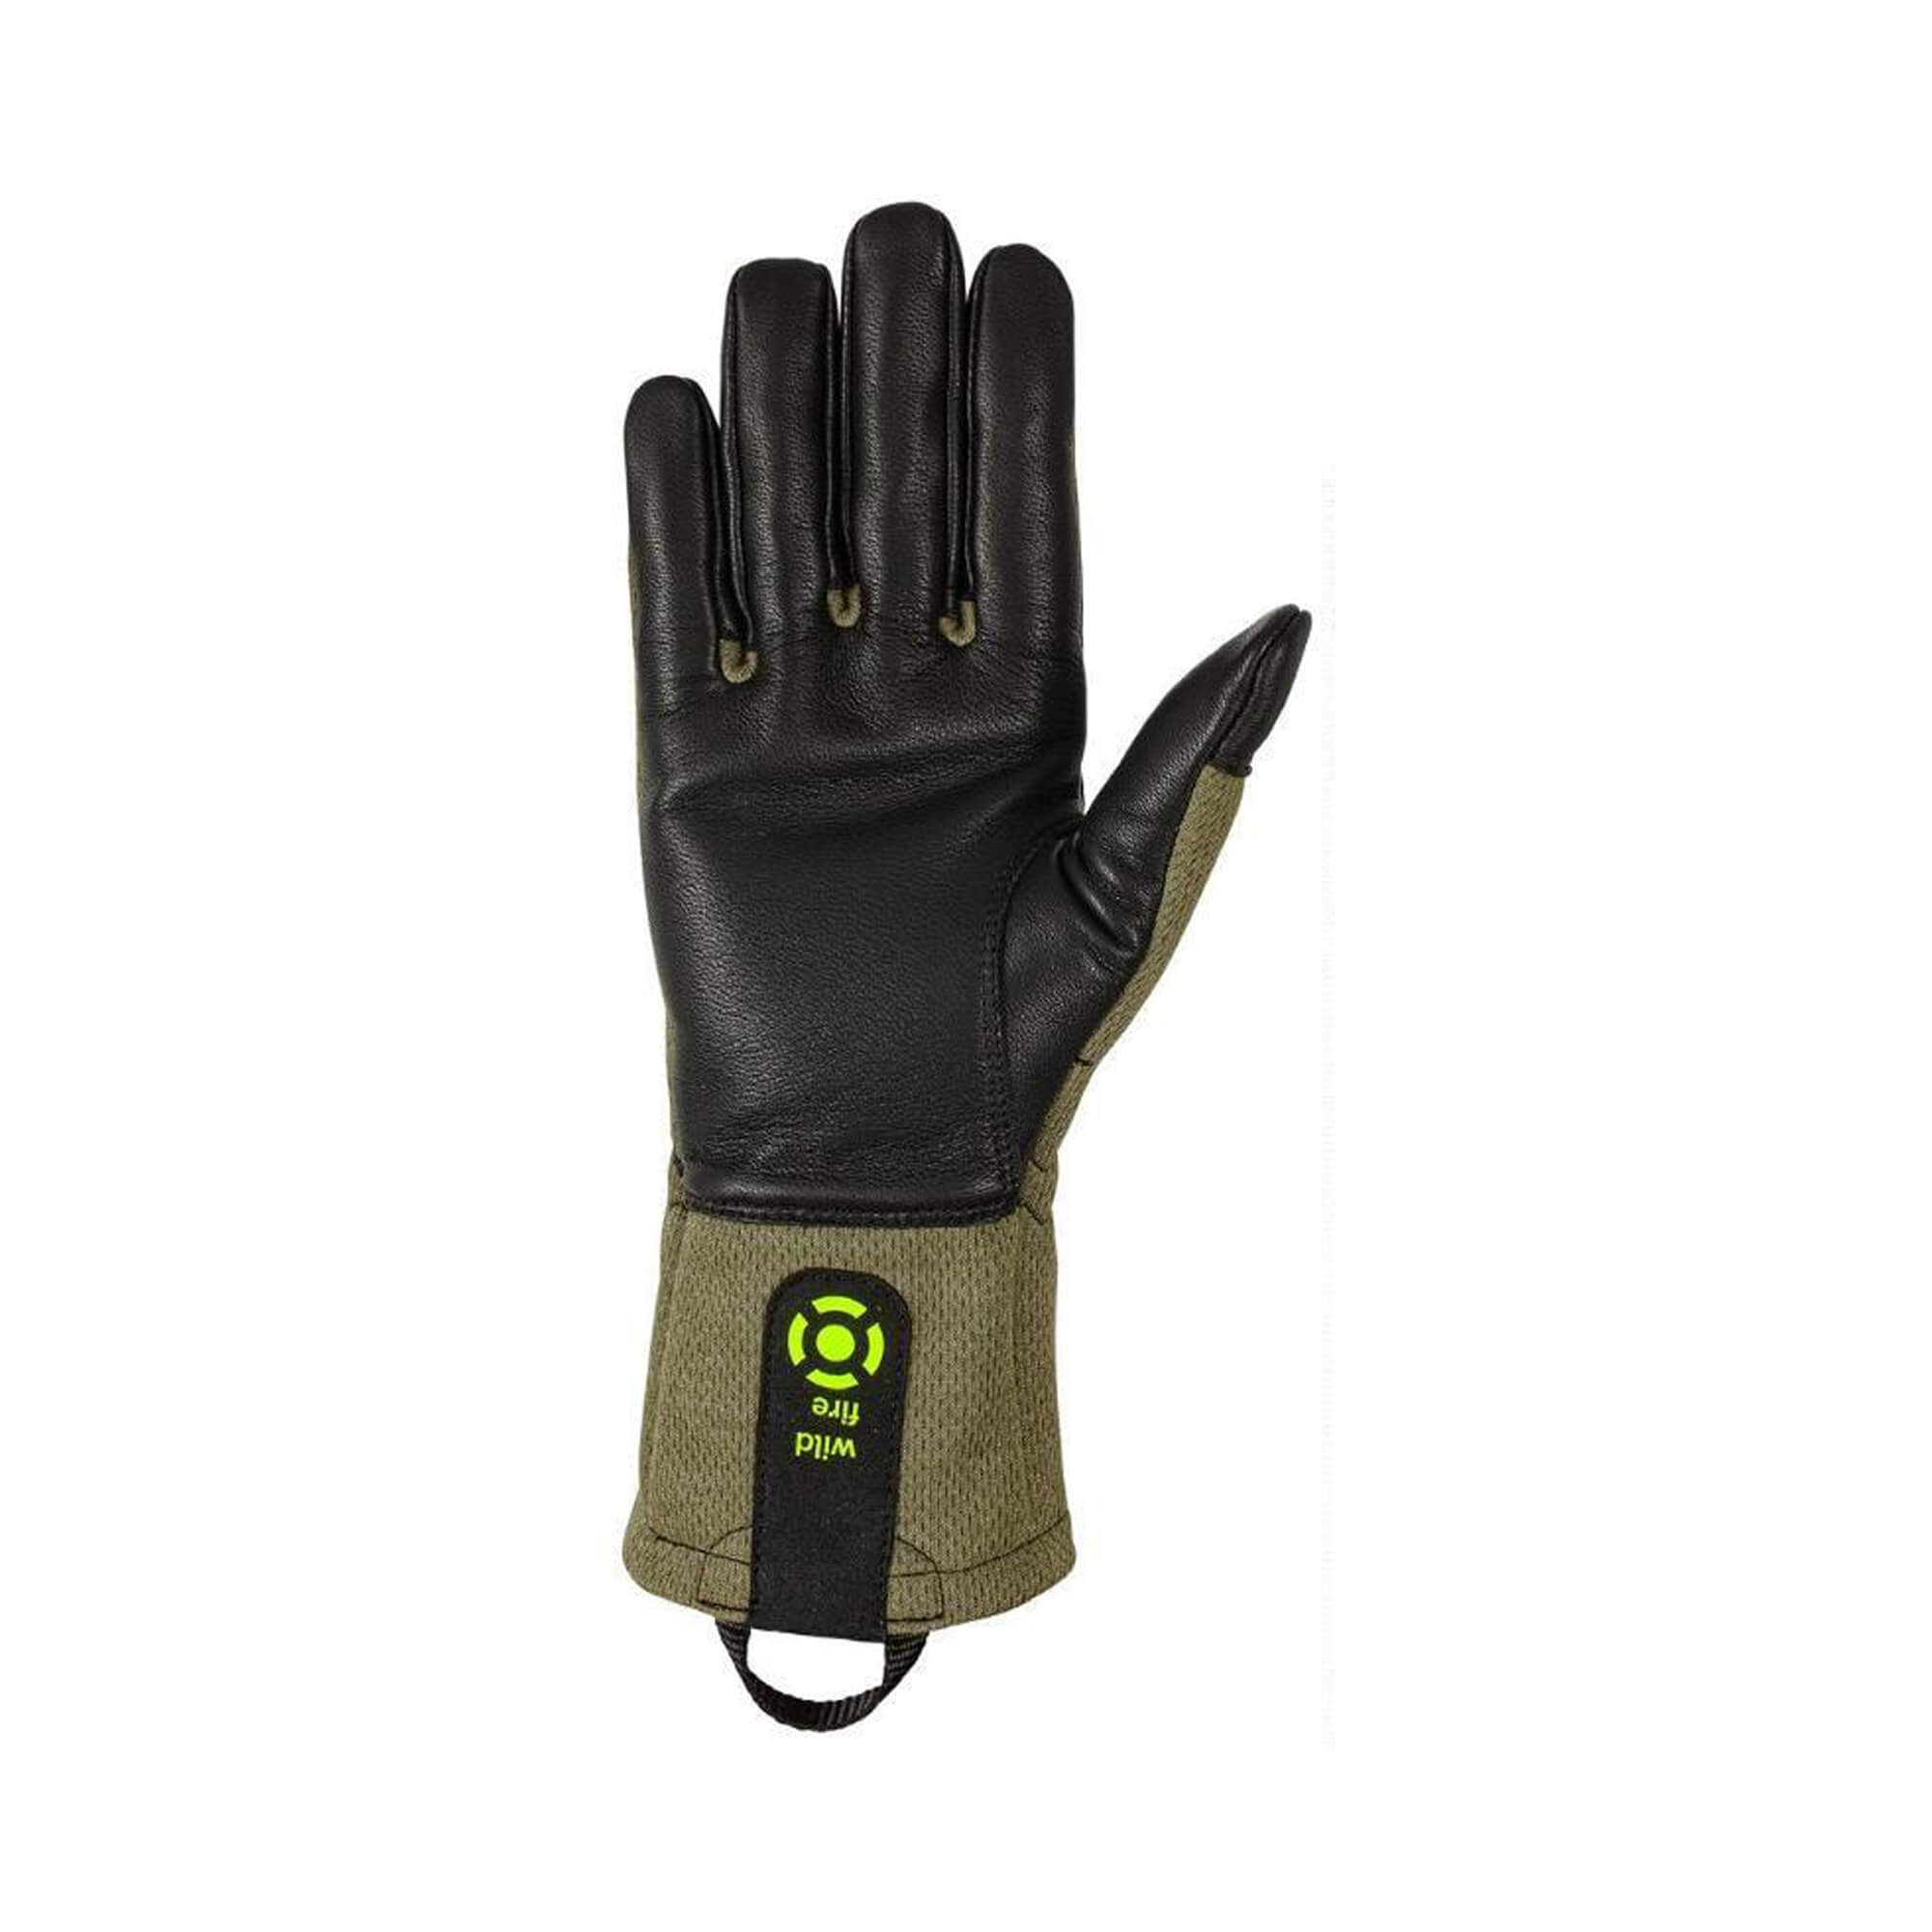 Emergency gloves for Firefighters and Rescuers Foresta